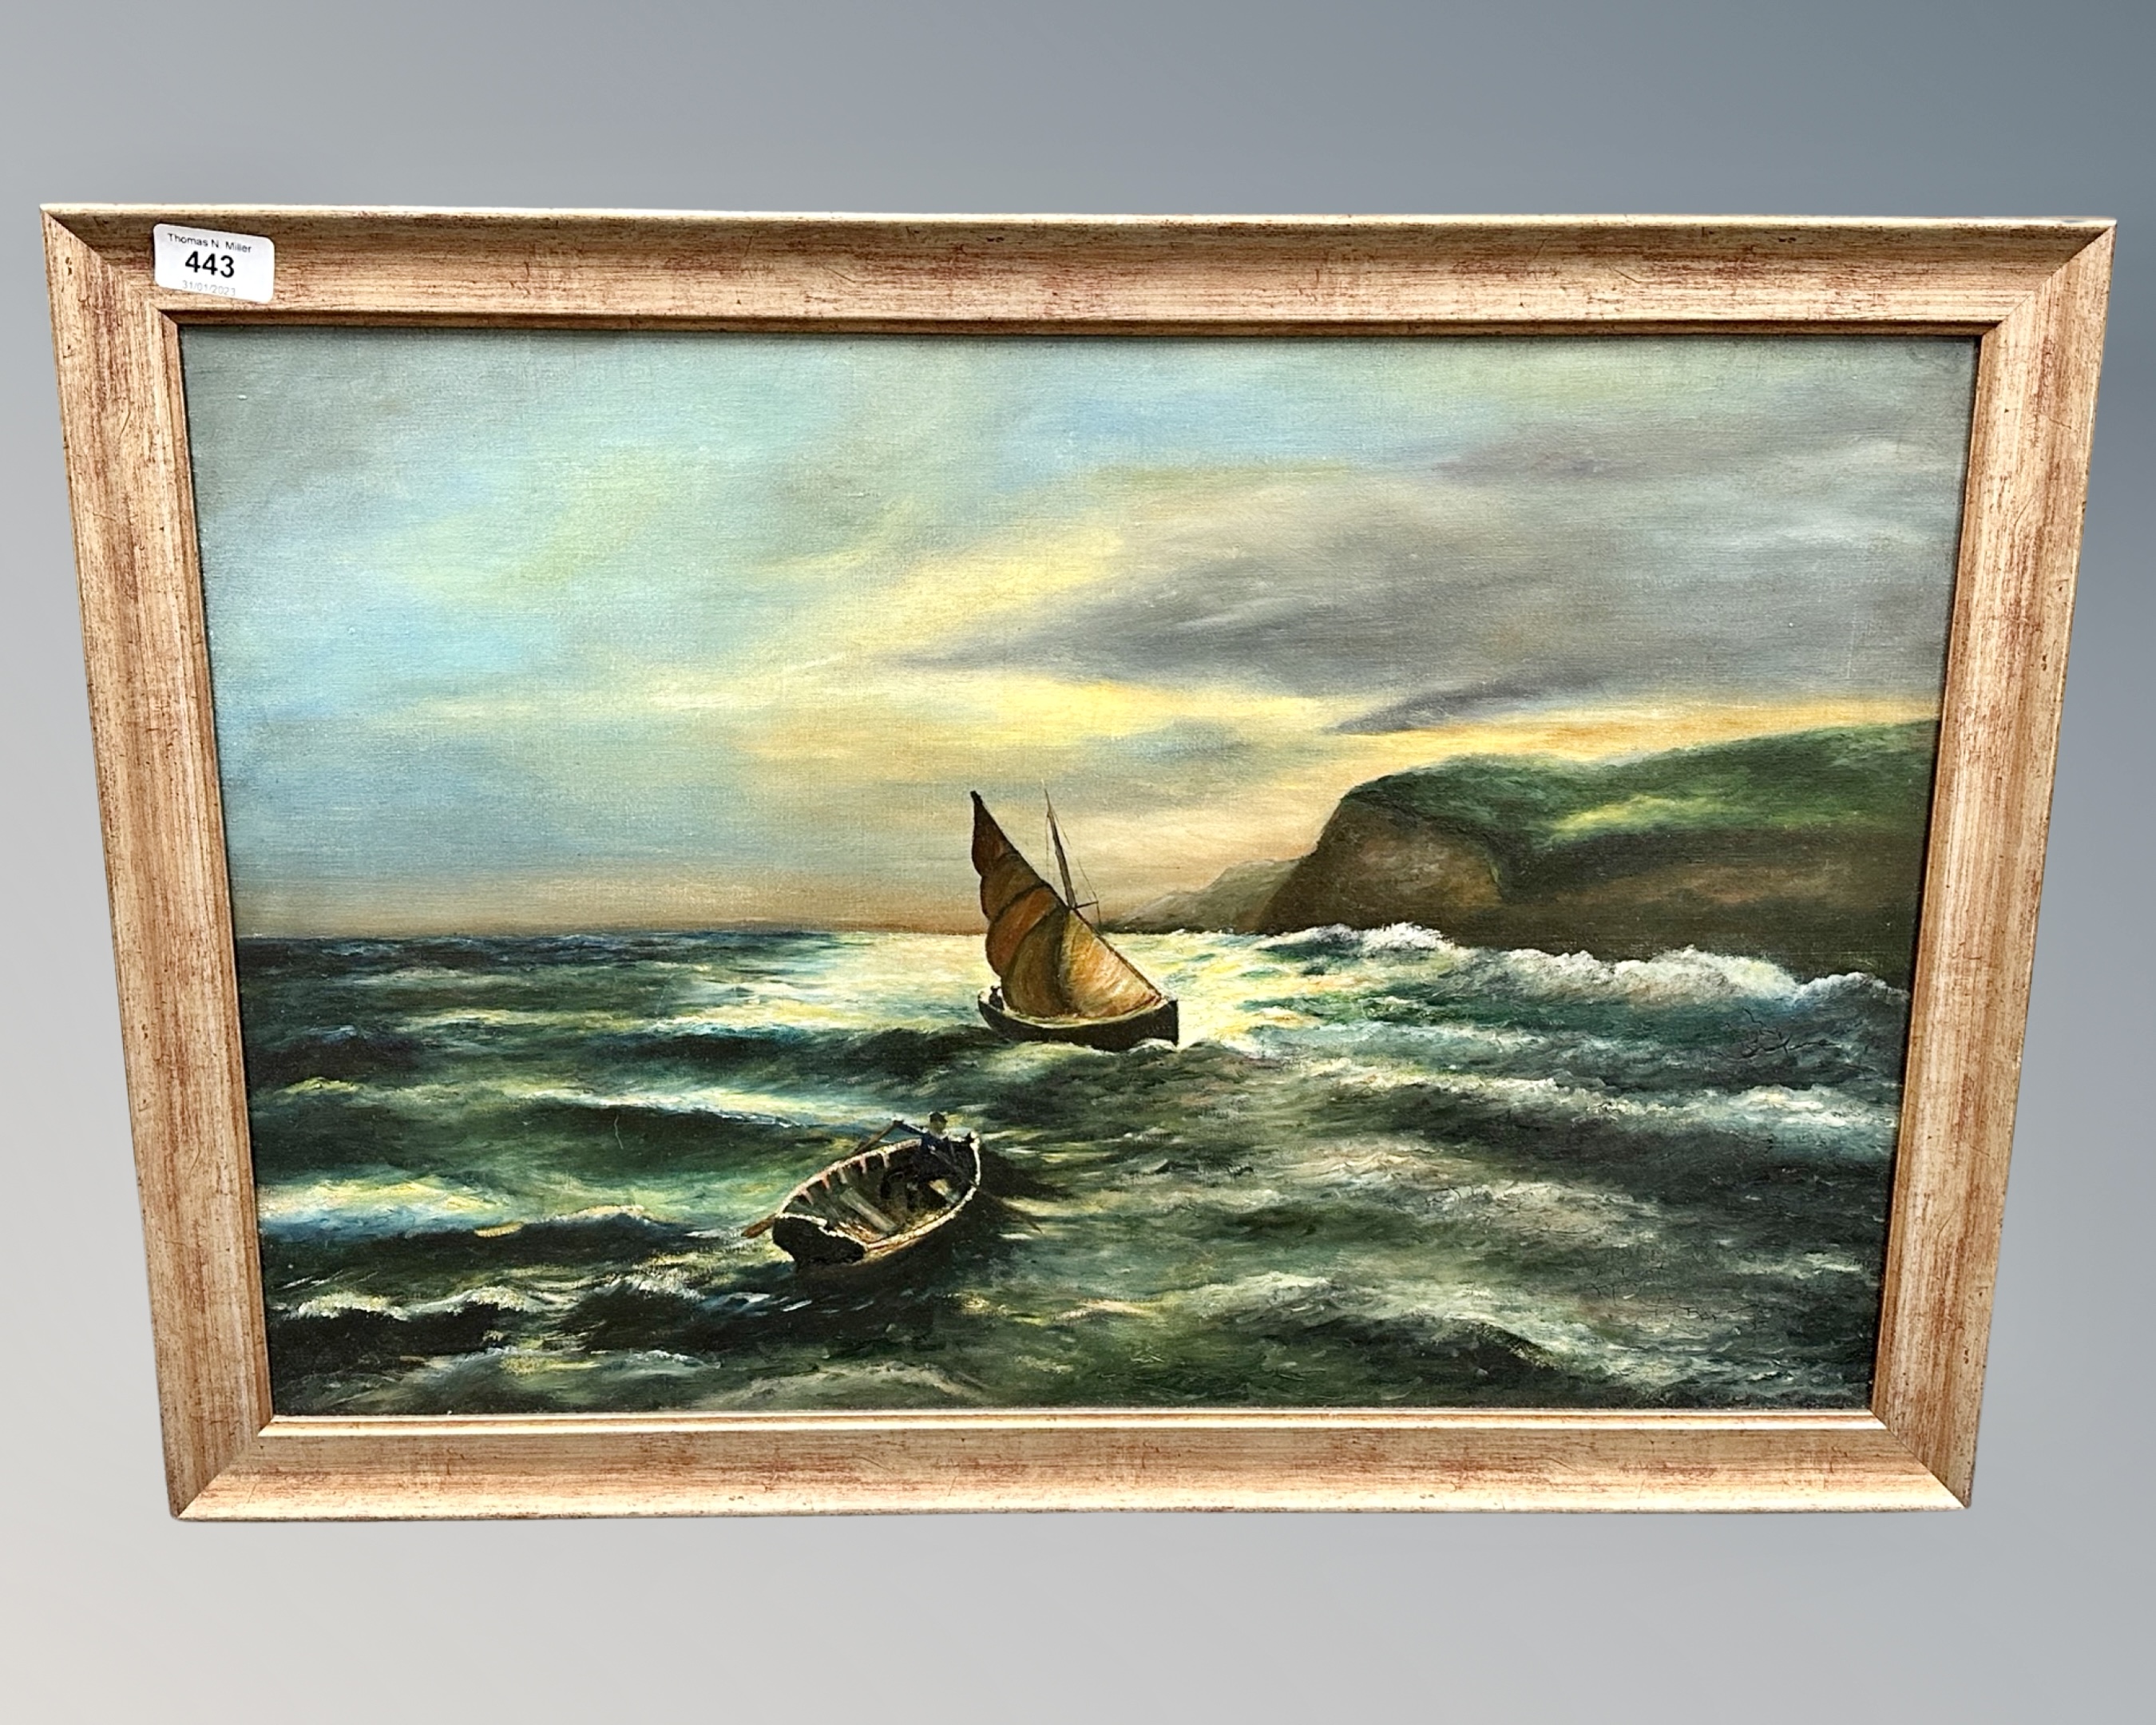 20th century school : Boats at sunset, oil on canvas, 60cm by 40cm.